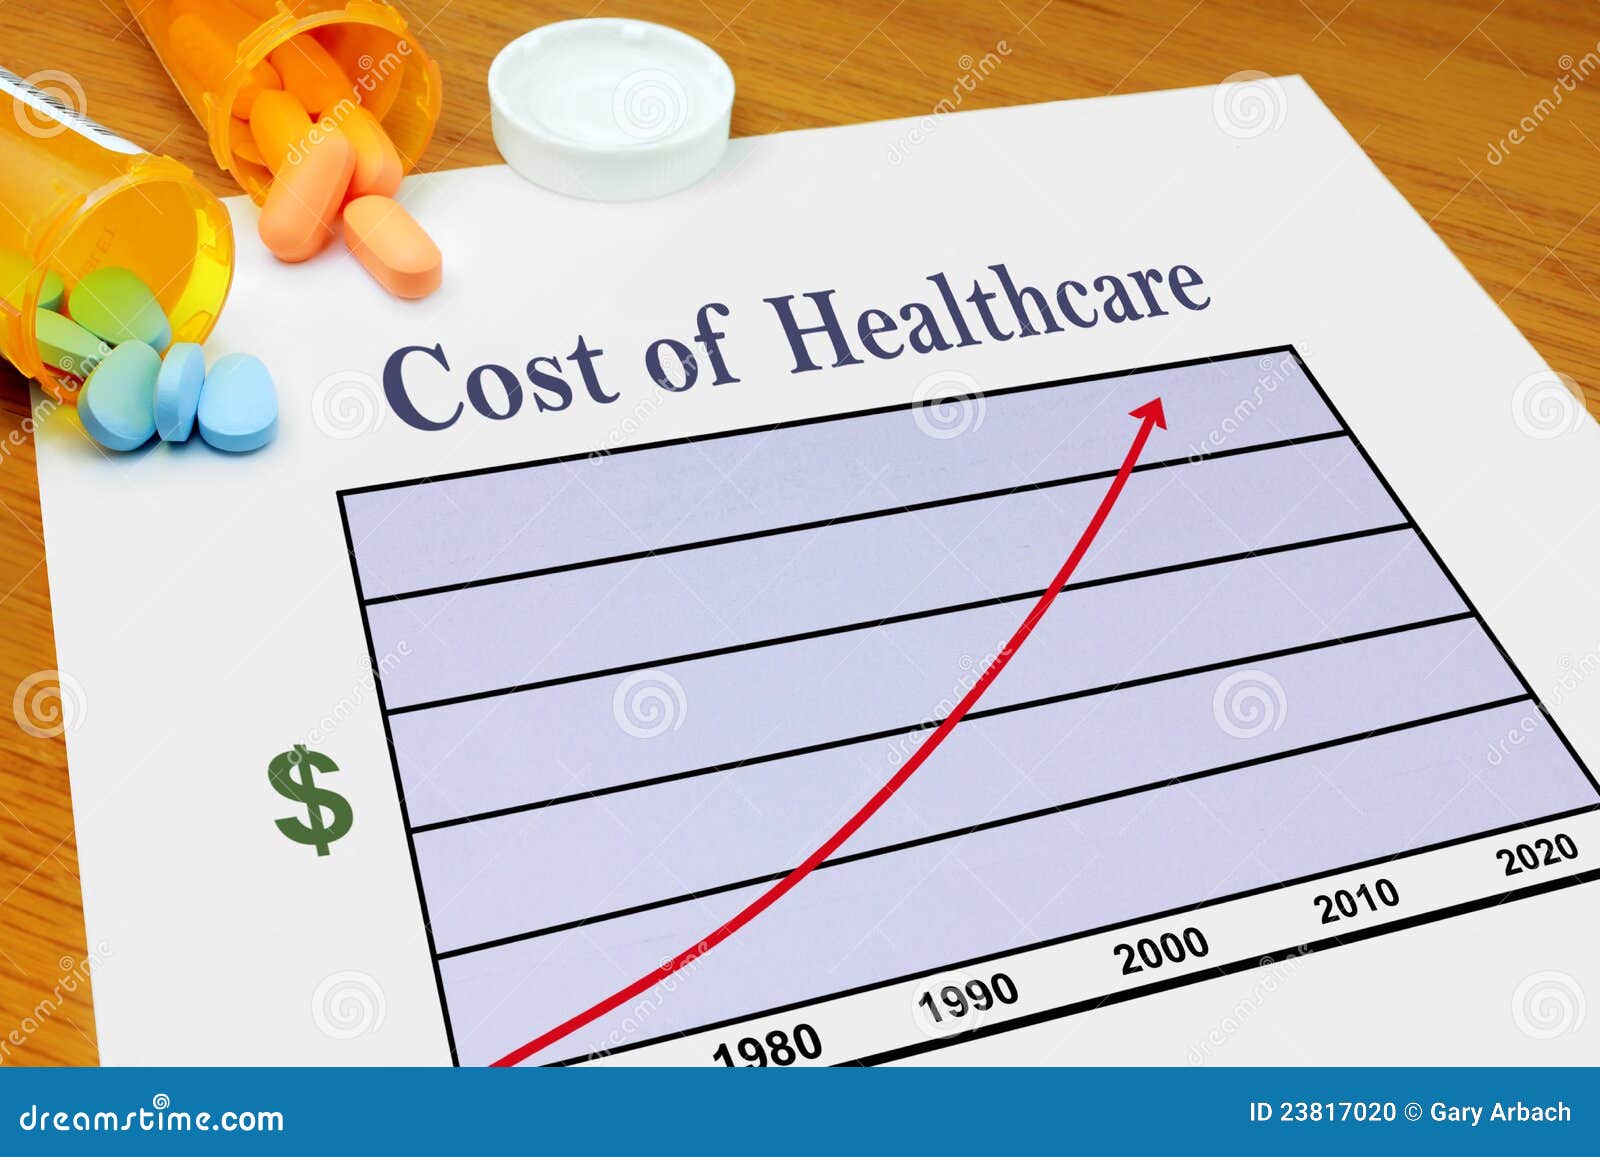 Increasing Cost Of Healthcare Stock Photo  Image: 23817020